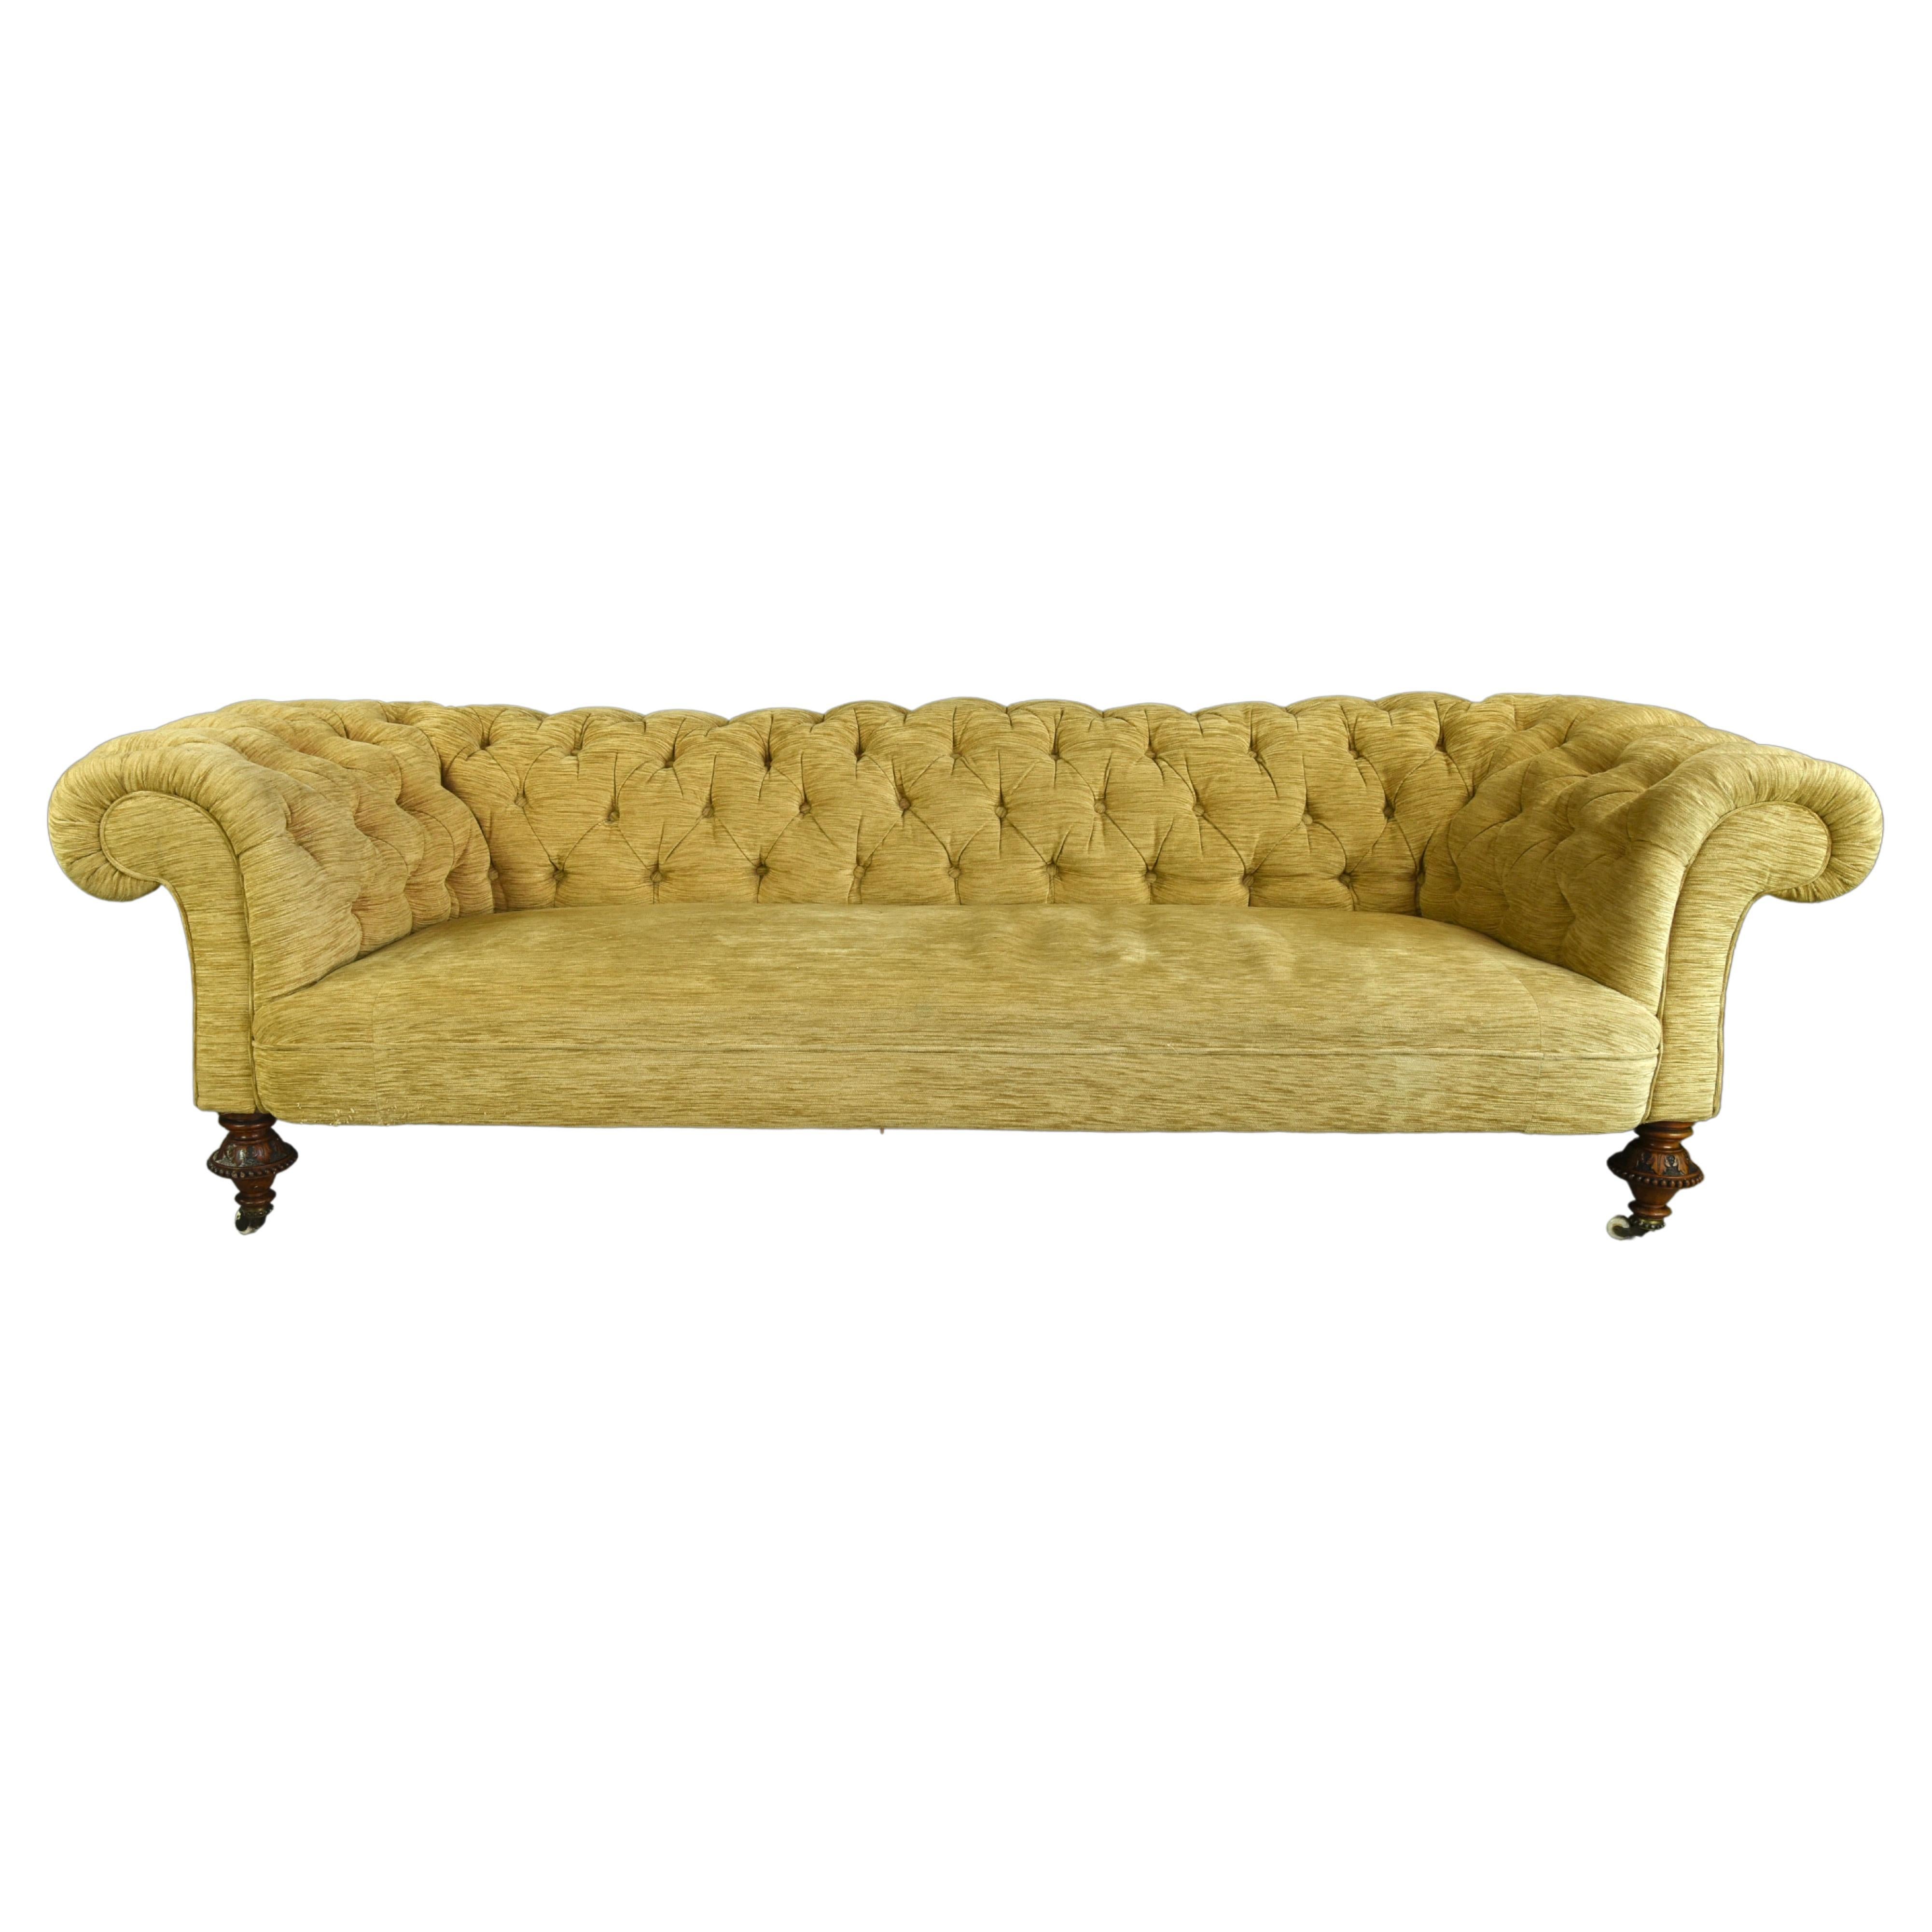 English Antique Early Large Victorian Chesterfield Sofa